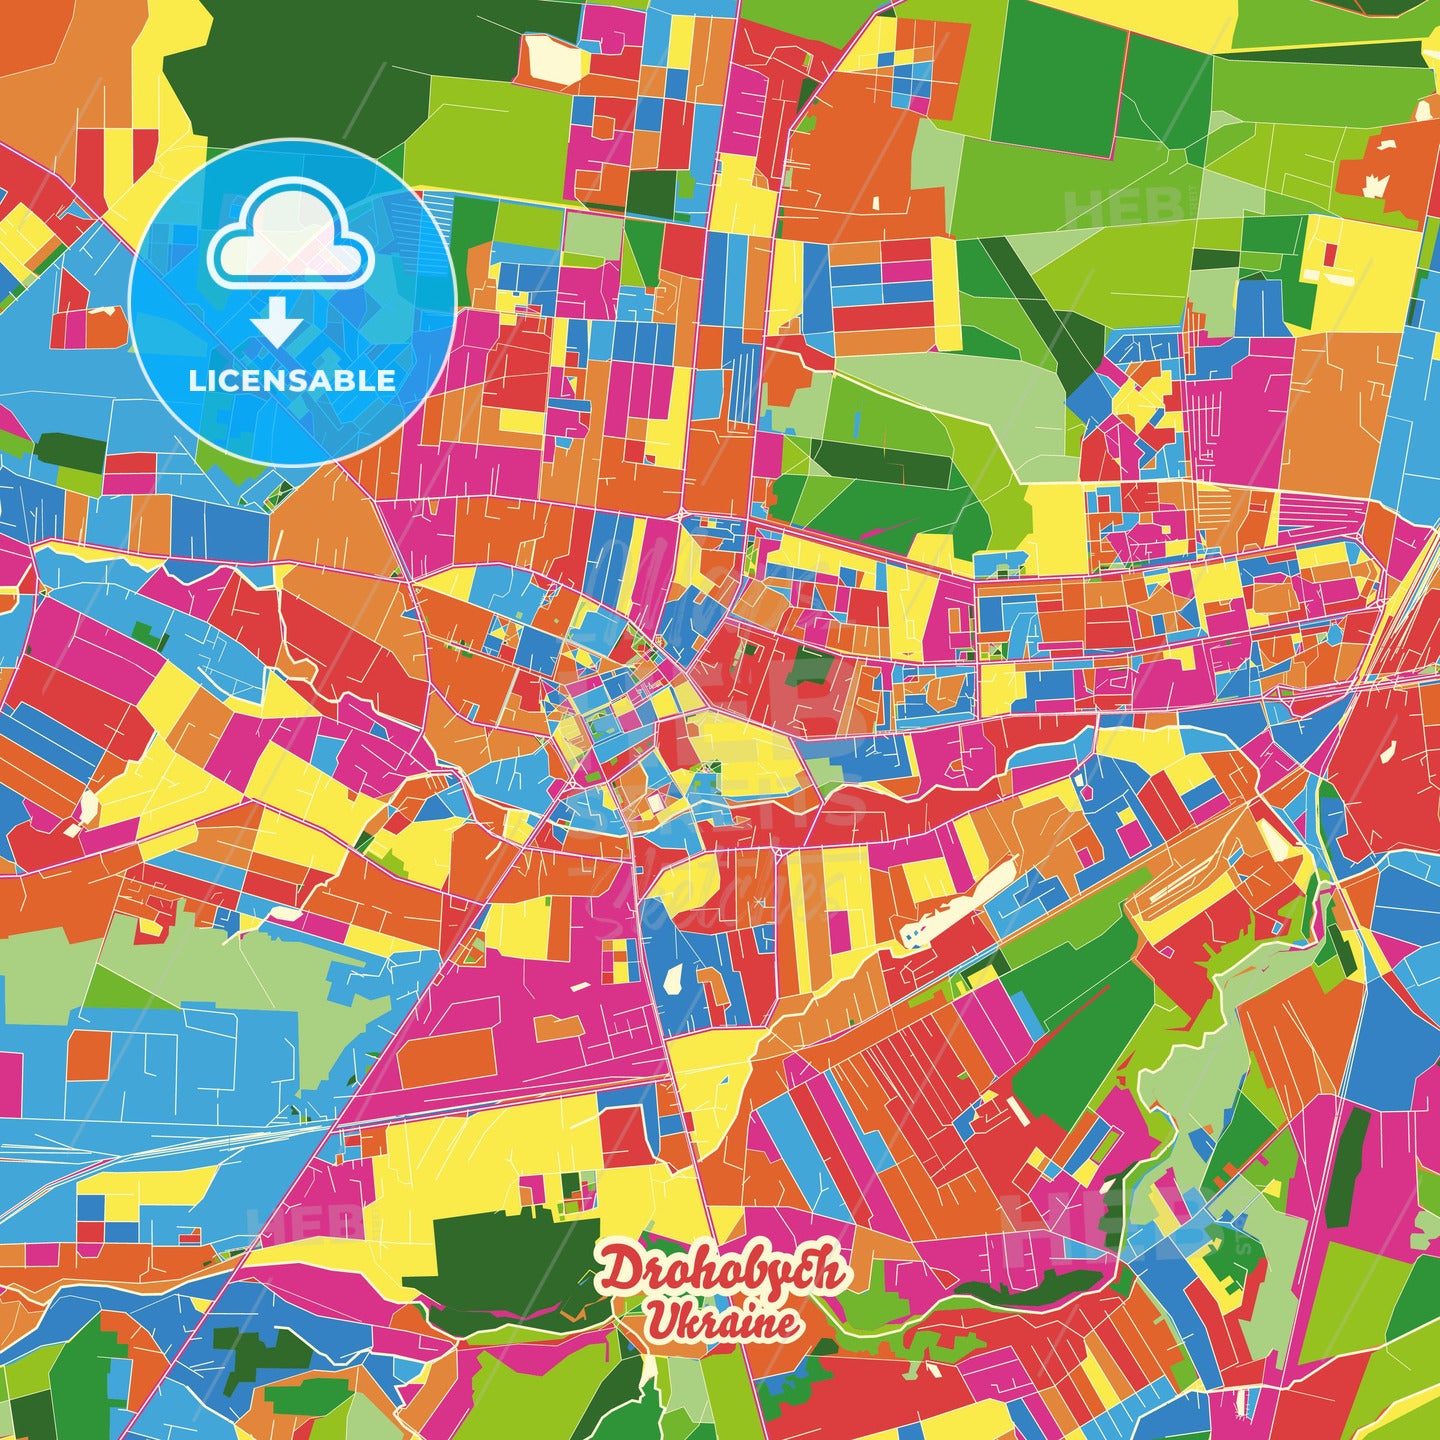 Drohobych, Ukraine Crazy Colorful Street Map Poster Template - HEBSTREITS Sketches